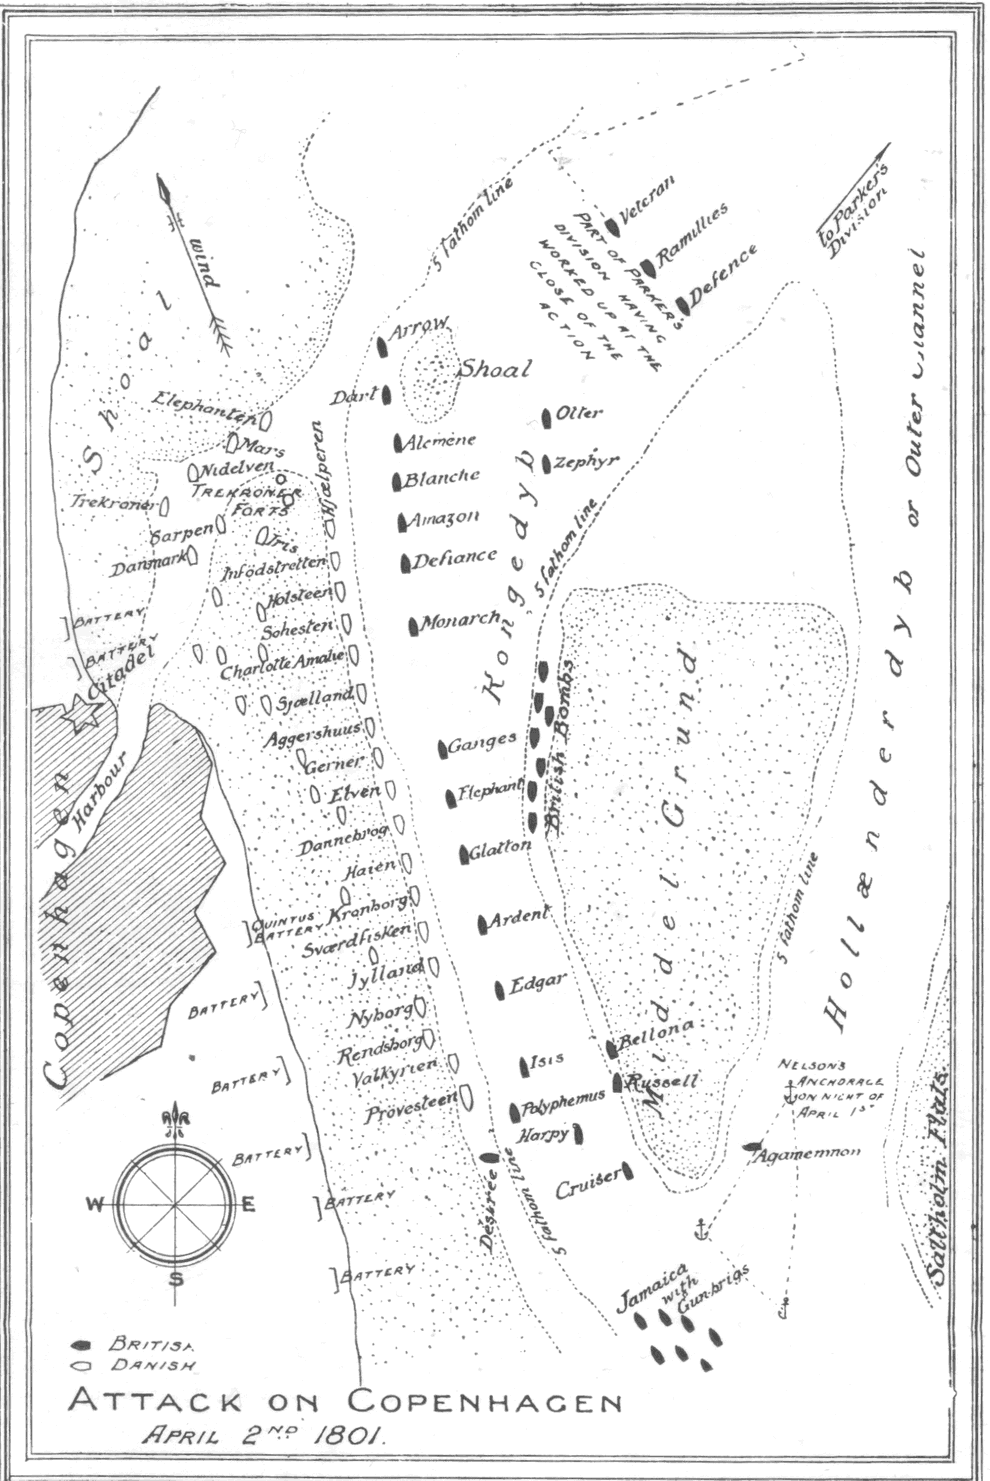 Map showing the location of the British and Danish ships during the battle of Copenhagen